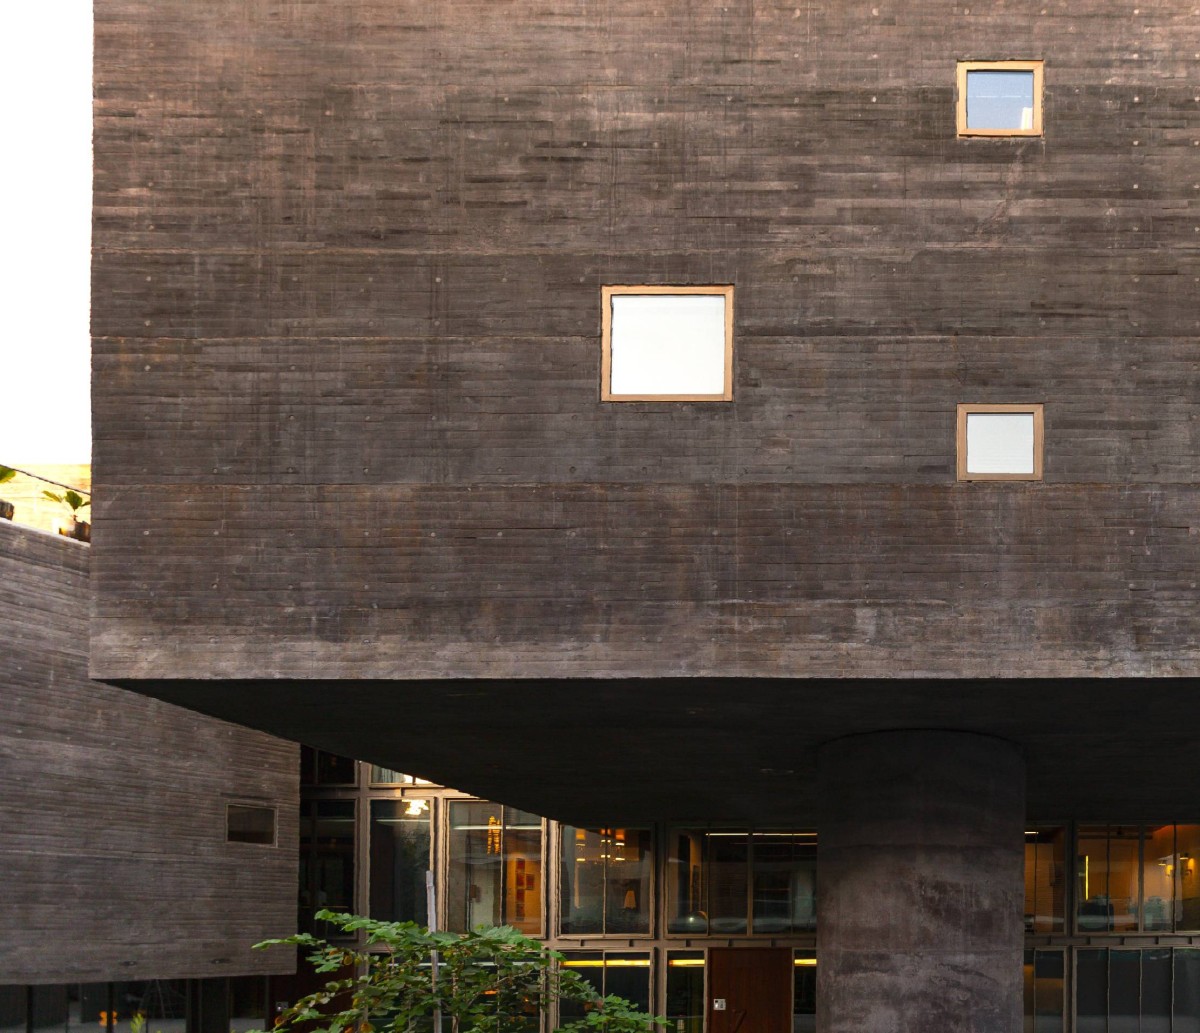 Exterior view of The Three Mashrabiyas House by Matra Architects and Rurban Planners